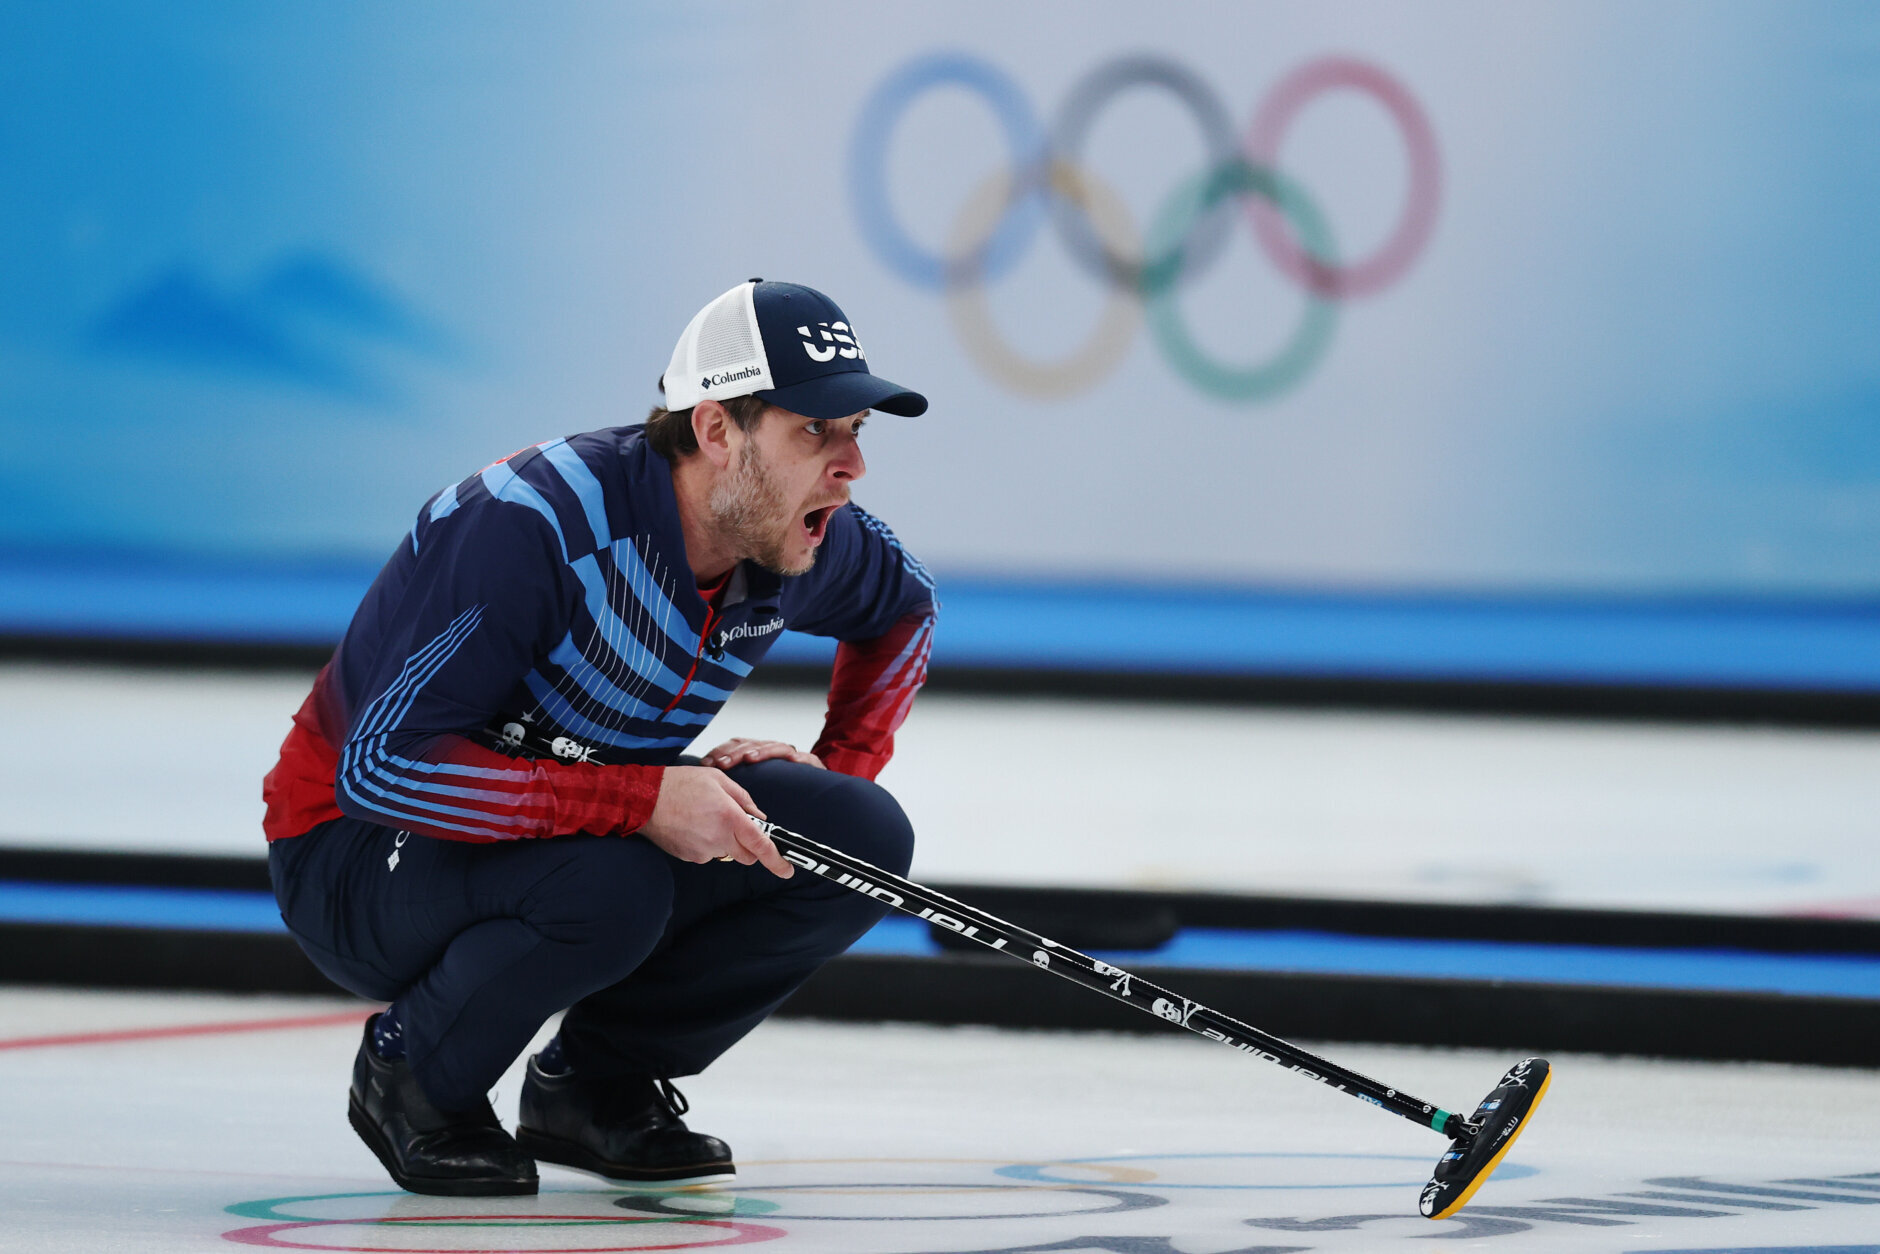 BEIJING, CHINA - FEBRUARY 17: John Shuster of Team United States competes against Team Great Britain during the Men’s Semifinal on Day 13 of the Beijing 2022 Winter Olympic Games at National Aquatics Centre on February 17, 2022 in Beijing, China. (Photo by Dean Mouhtaropoulos/Getty Images)